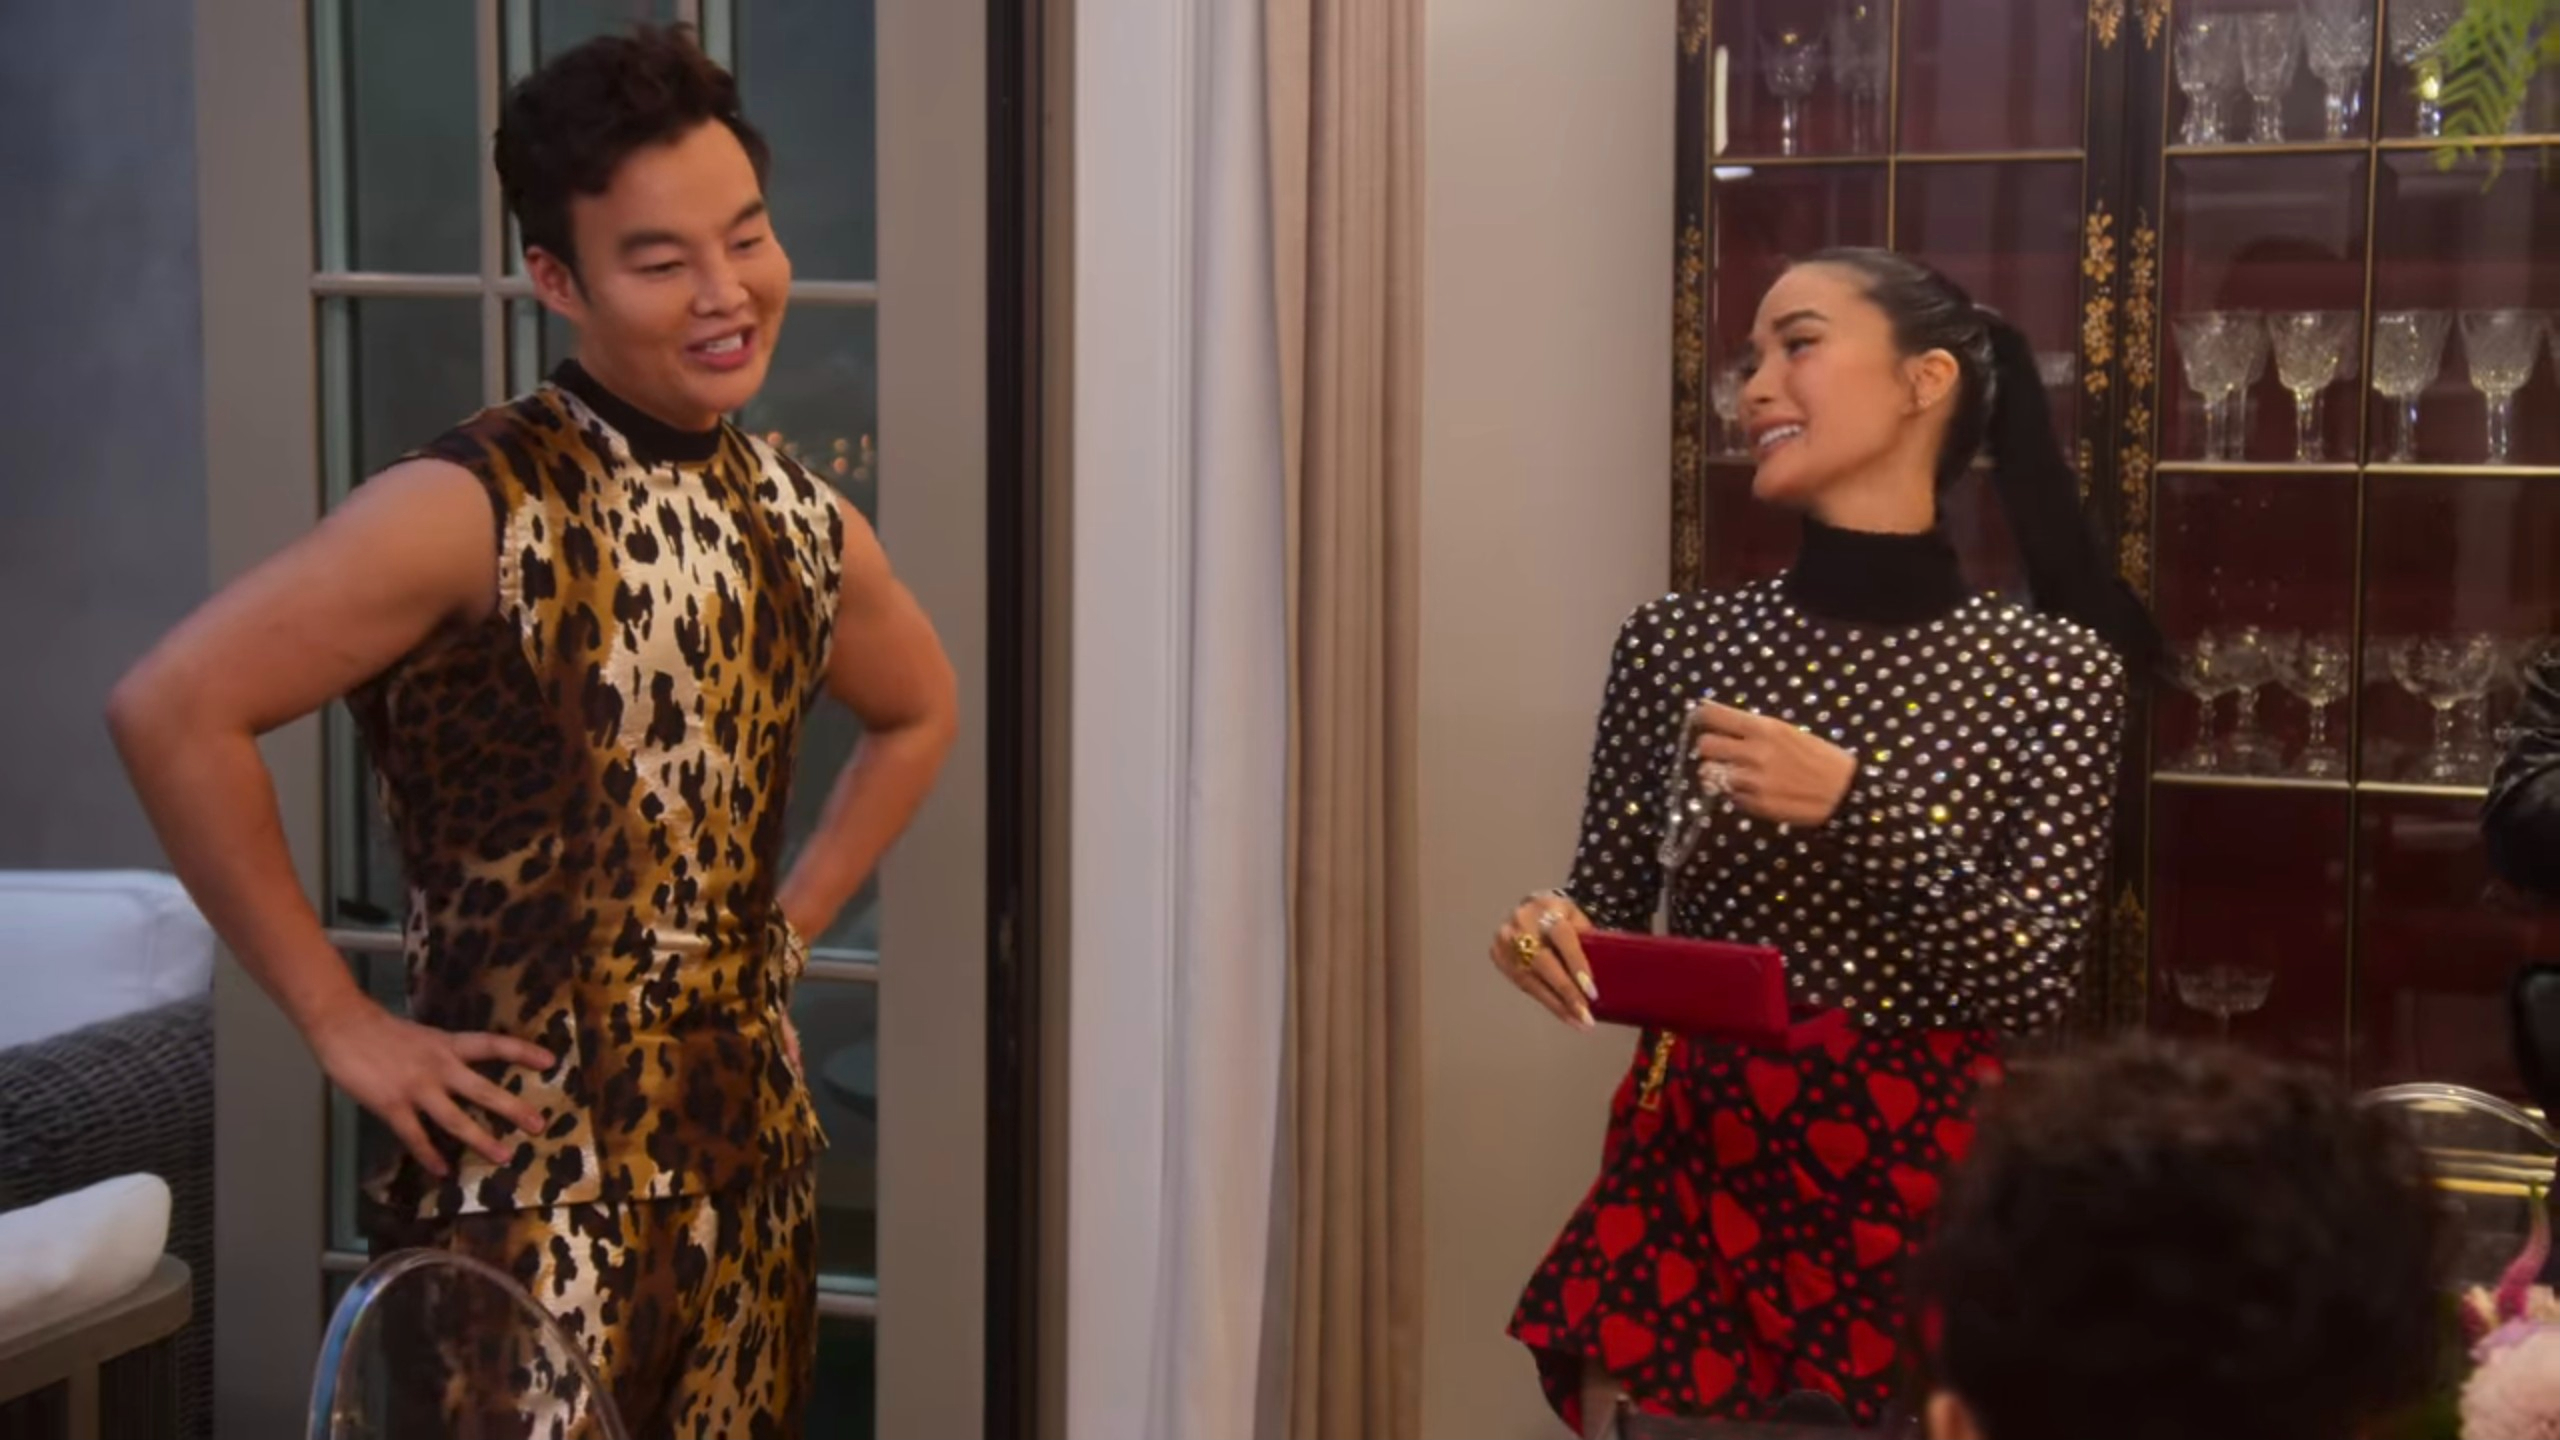 Heart Evangelista Gifts Kane Lim A Diamond Necklace From Cartier On “bling  Empire”